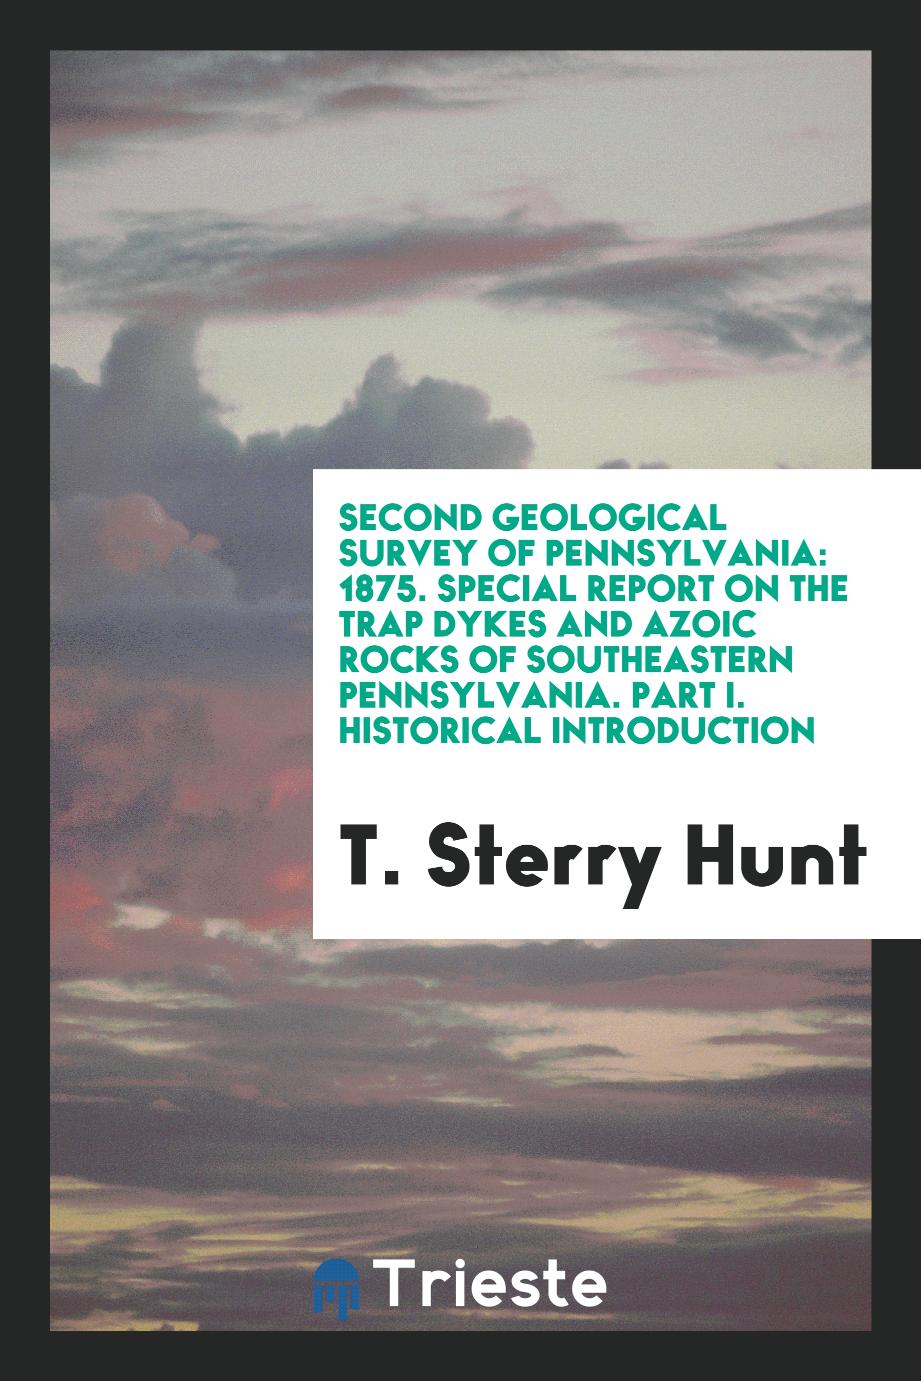 Second Geological Survey of Pennsylvania: 1875. Special Report on the Trap Dykes and Azoic Rocks of Southeastern Pennsylvania. Part I. Historical Introduction